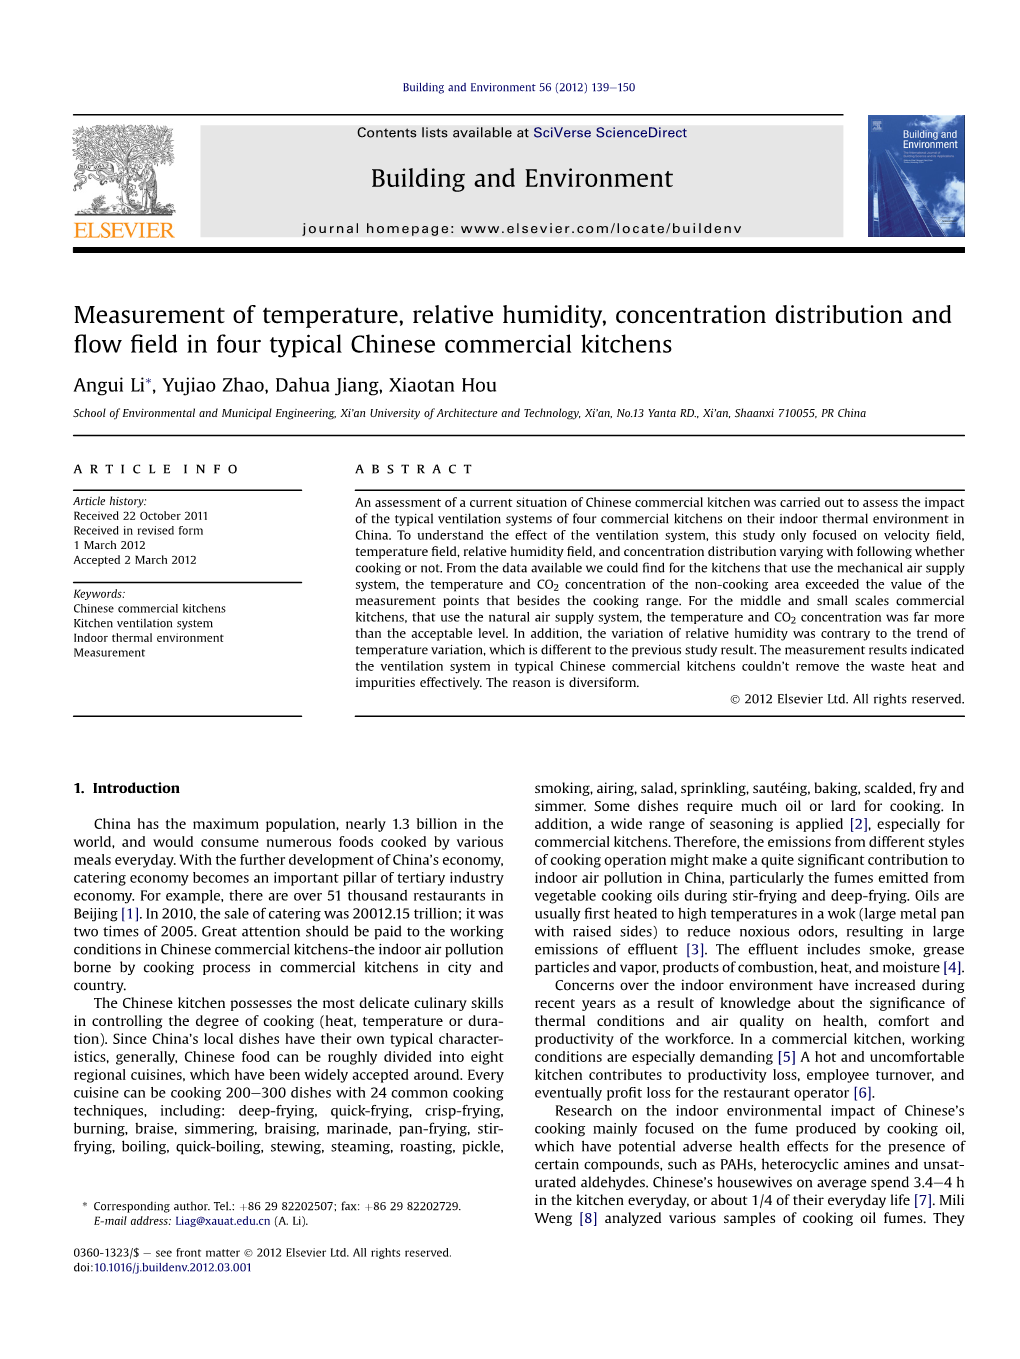 Measurement of Temperature, Relative Humidity, Concentration Distribution and ﬂow ﬁeld in Four Typical Chinese Commercial Kitchens